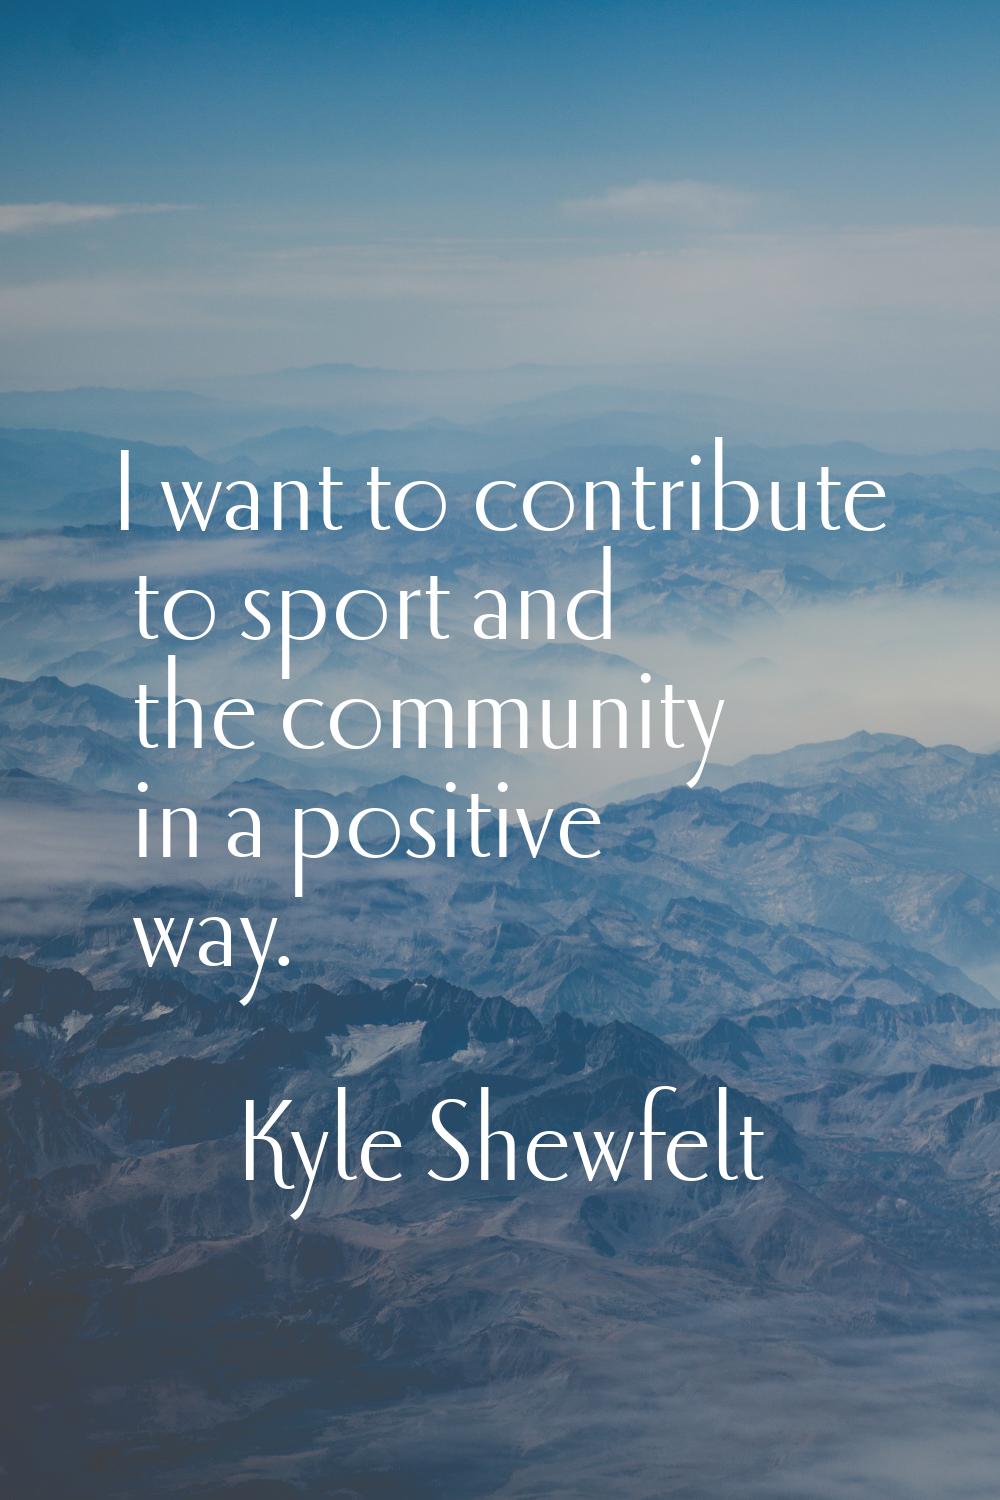 I want to contribute to sport and the community in a positive way.